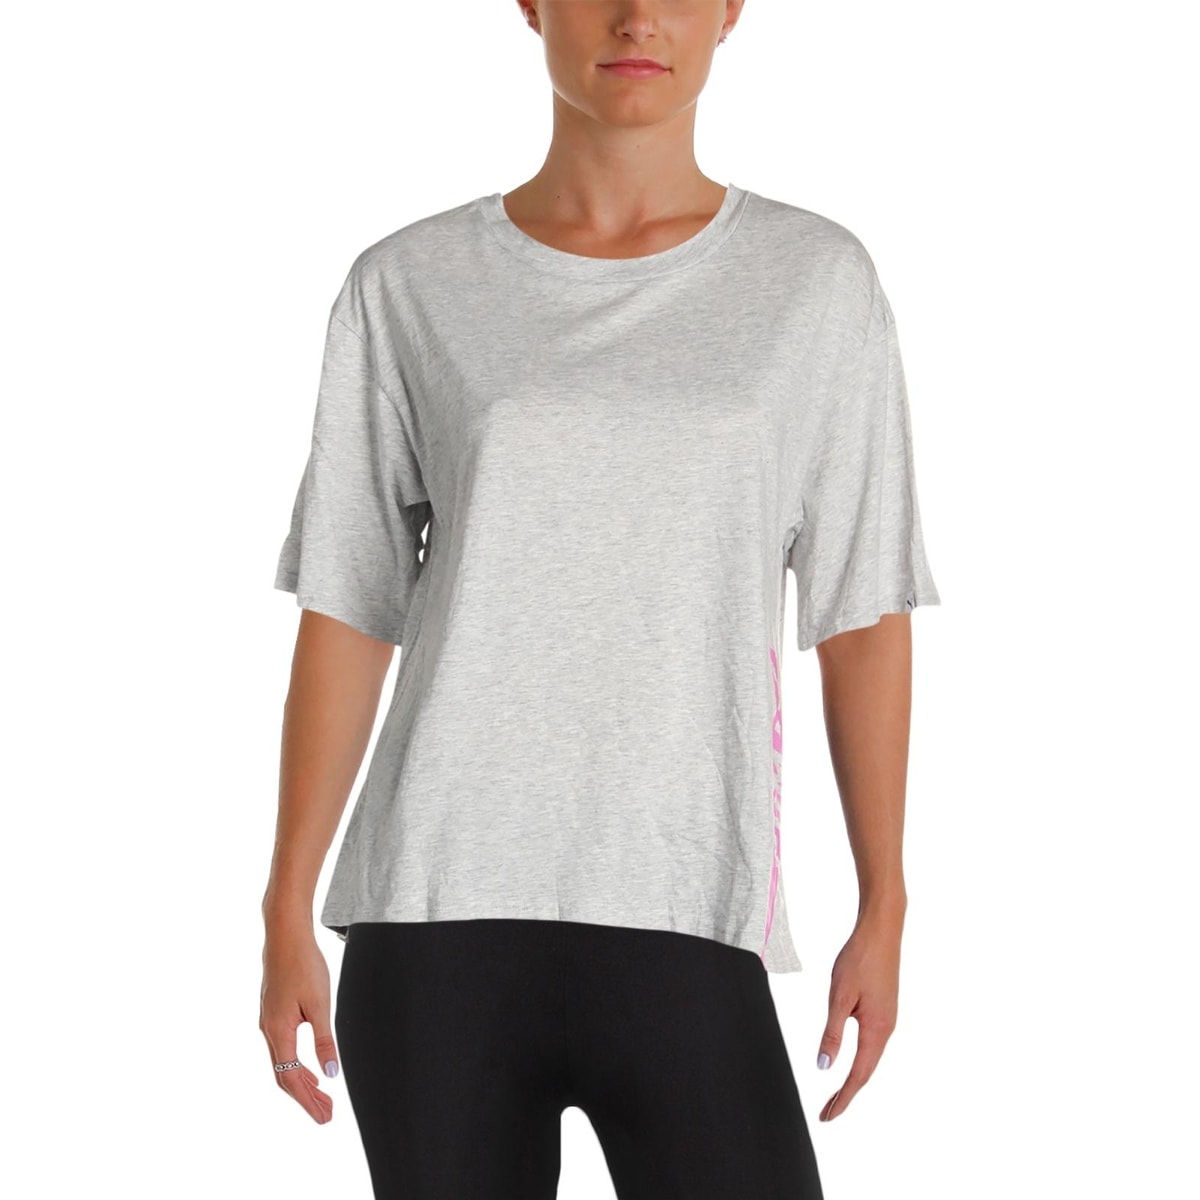 Shop Puma Womens Fusion T Shirt Drycell Graphic Overstock 26033508